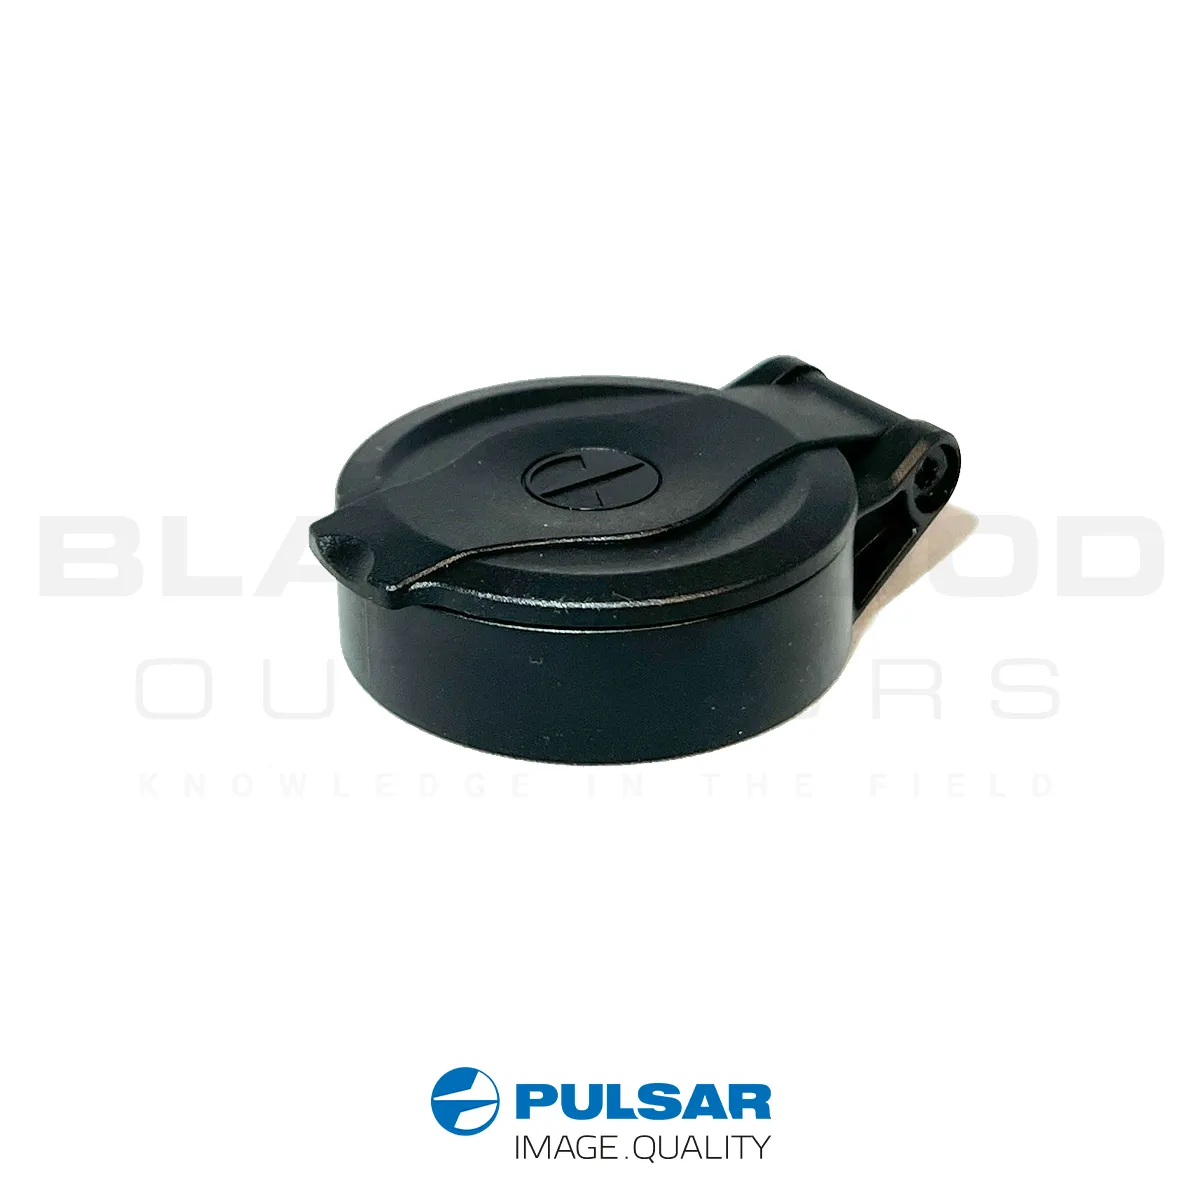 Pulsar Helion and Quantum 38mm thermal replacement lens cap.